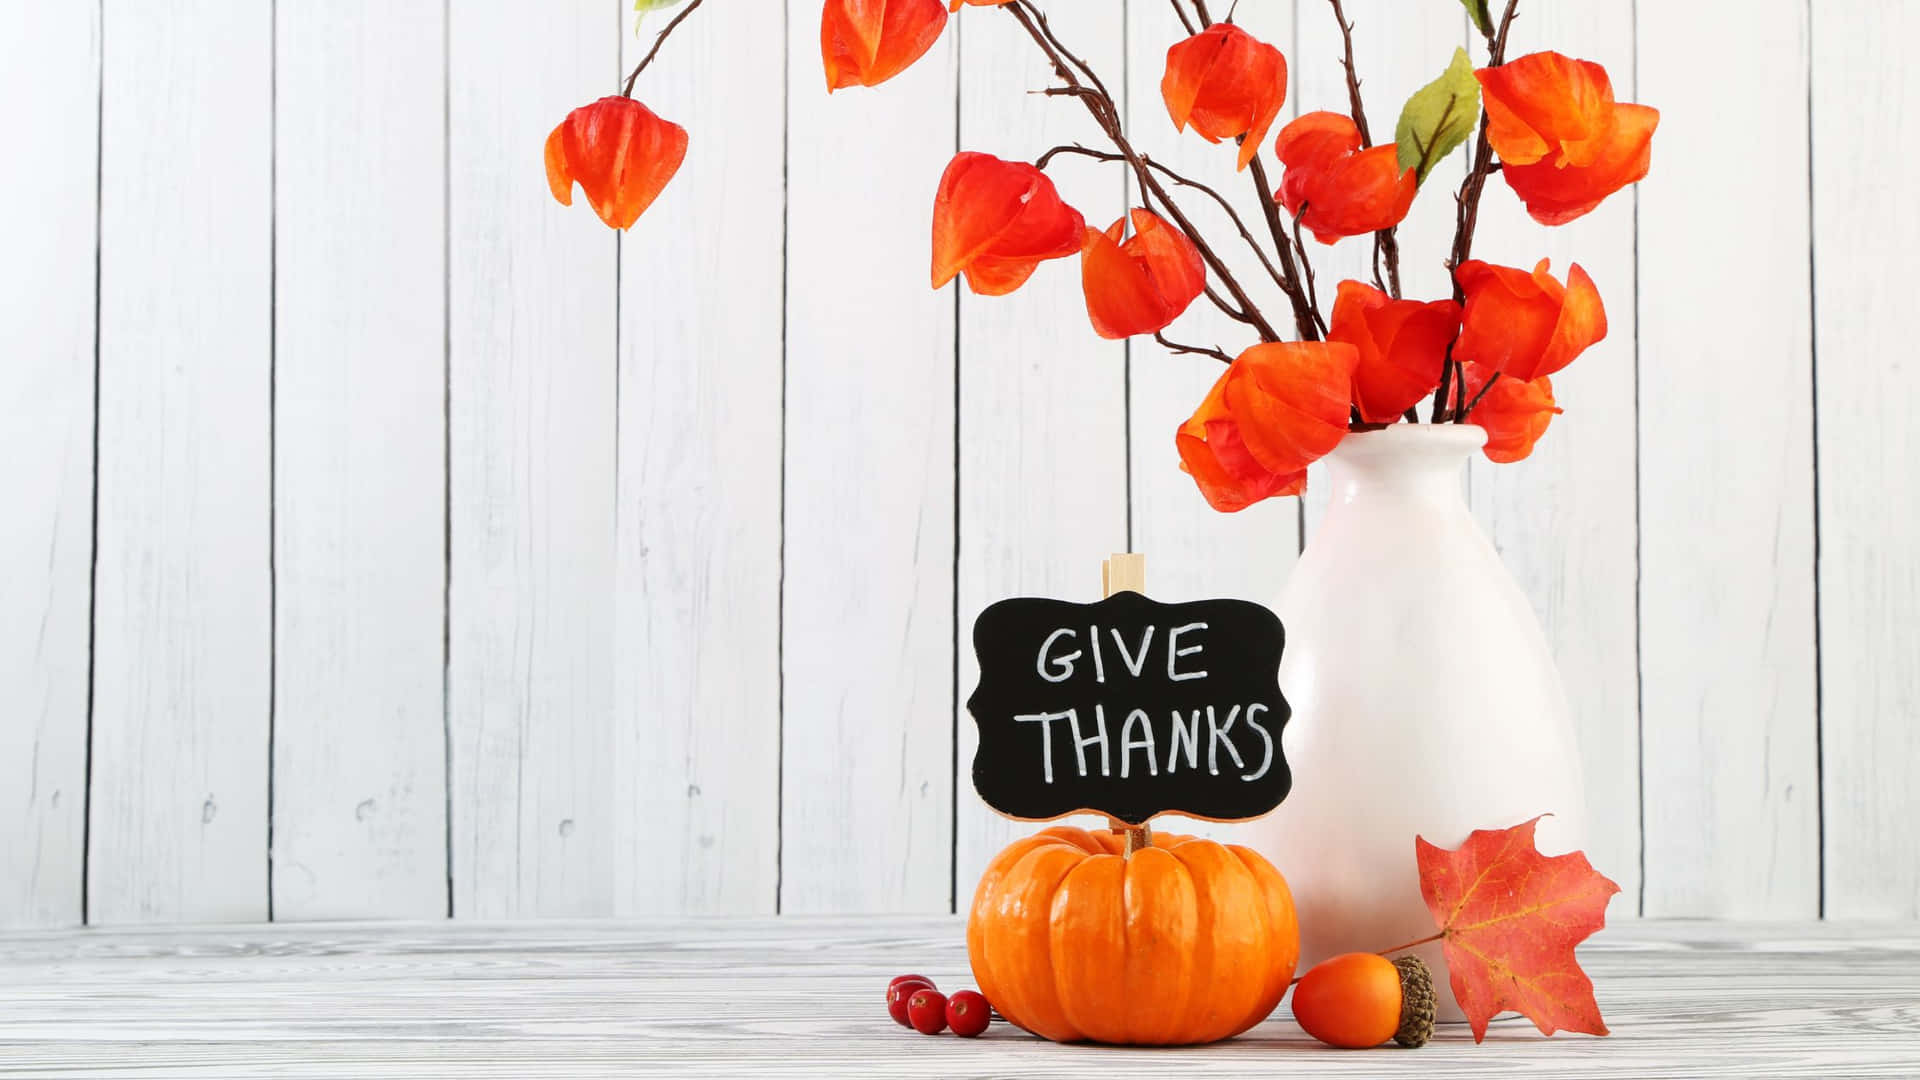 Celebrate Thanksgiving with Delicious Food and Joy Wallpaper